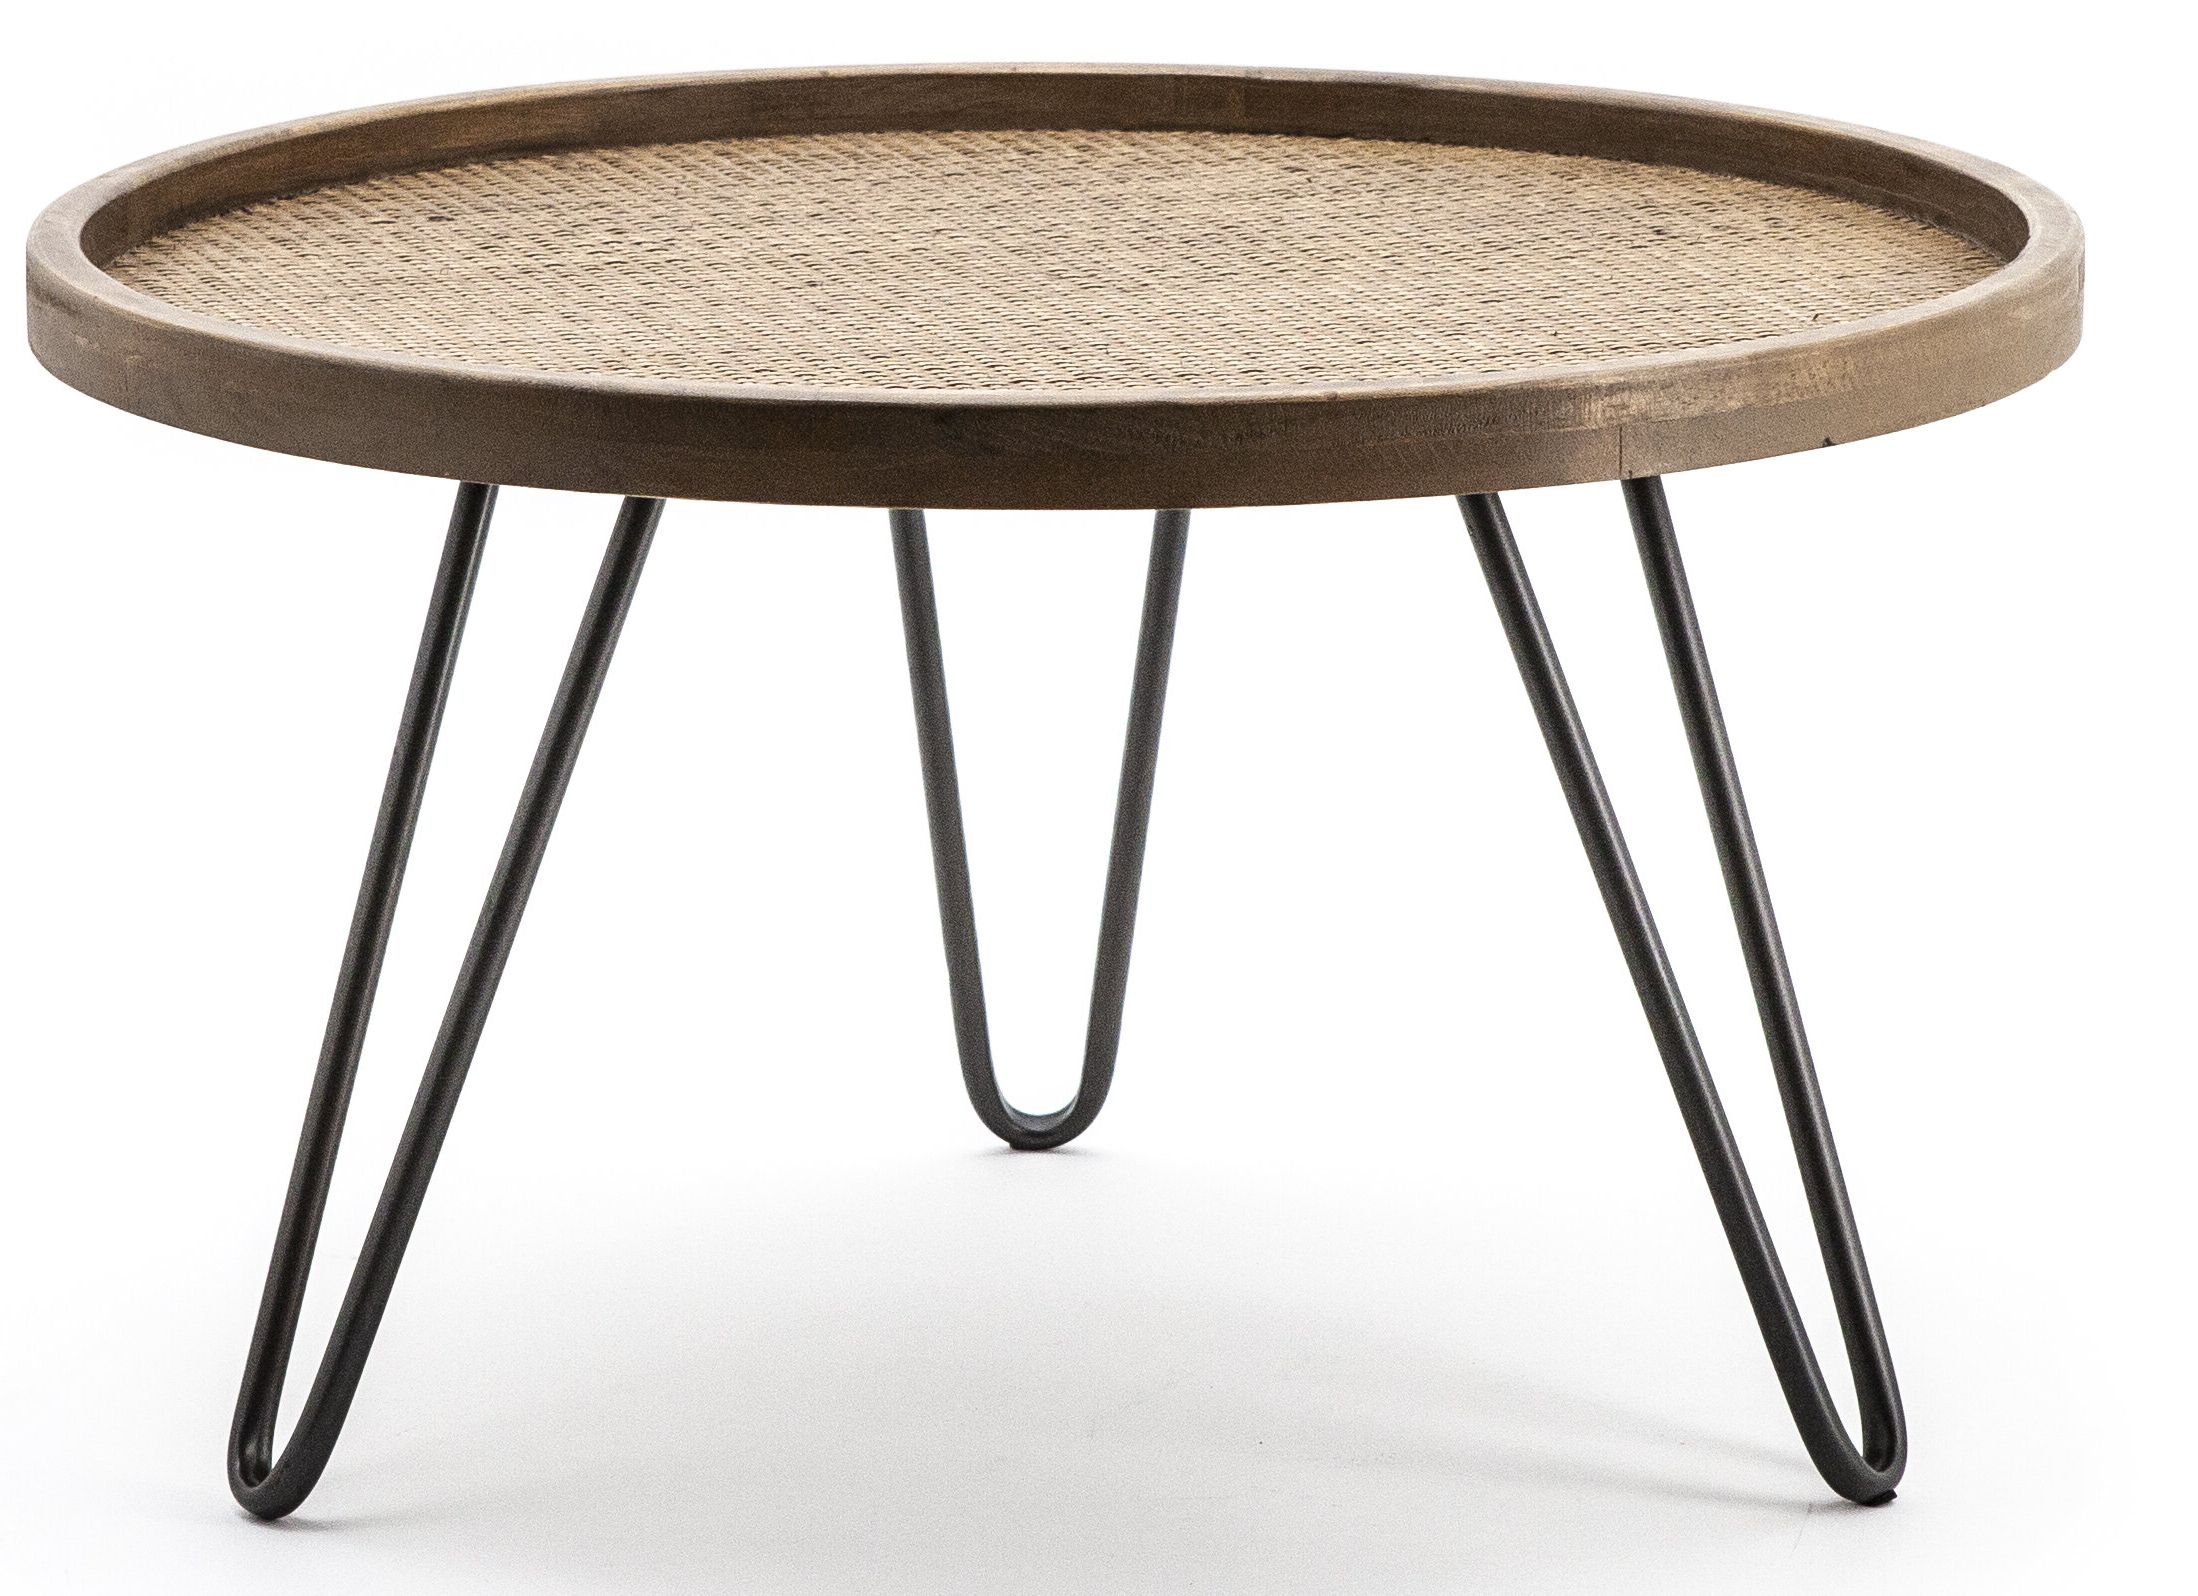 Wayfair Within Well Known 3 Leg Coffee Tables (View 11 of 20)